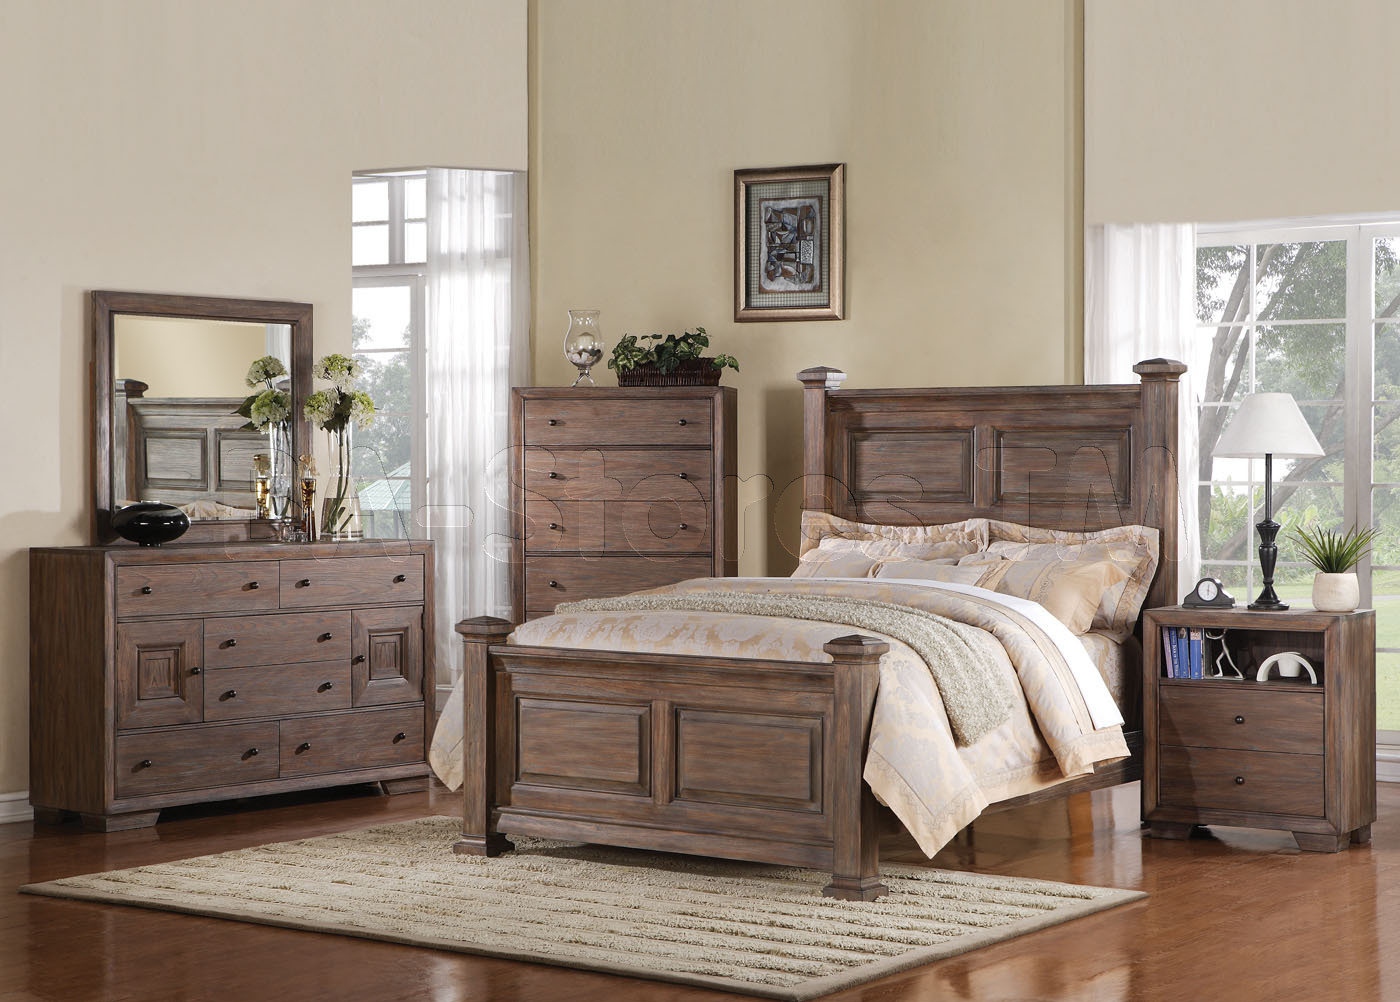 cream colored bedroom furniture cream painted bedroom furniture wooden pine  wood color oak colored chocolate brown